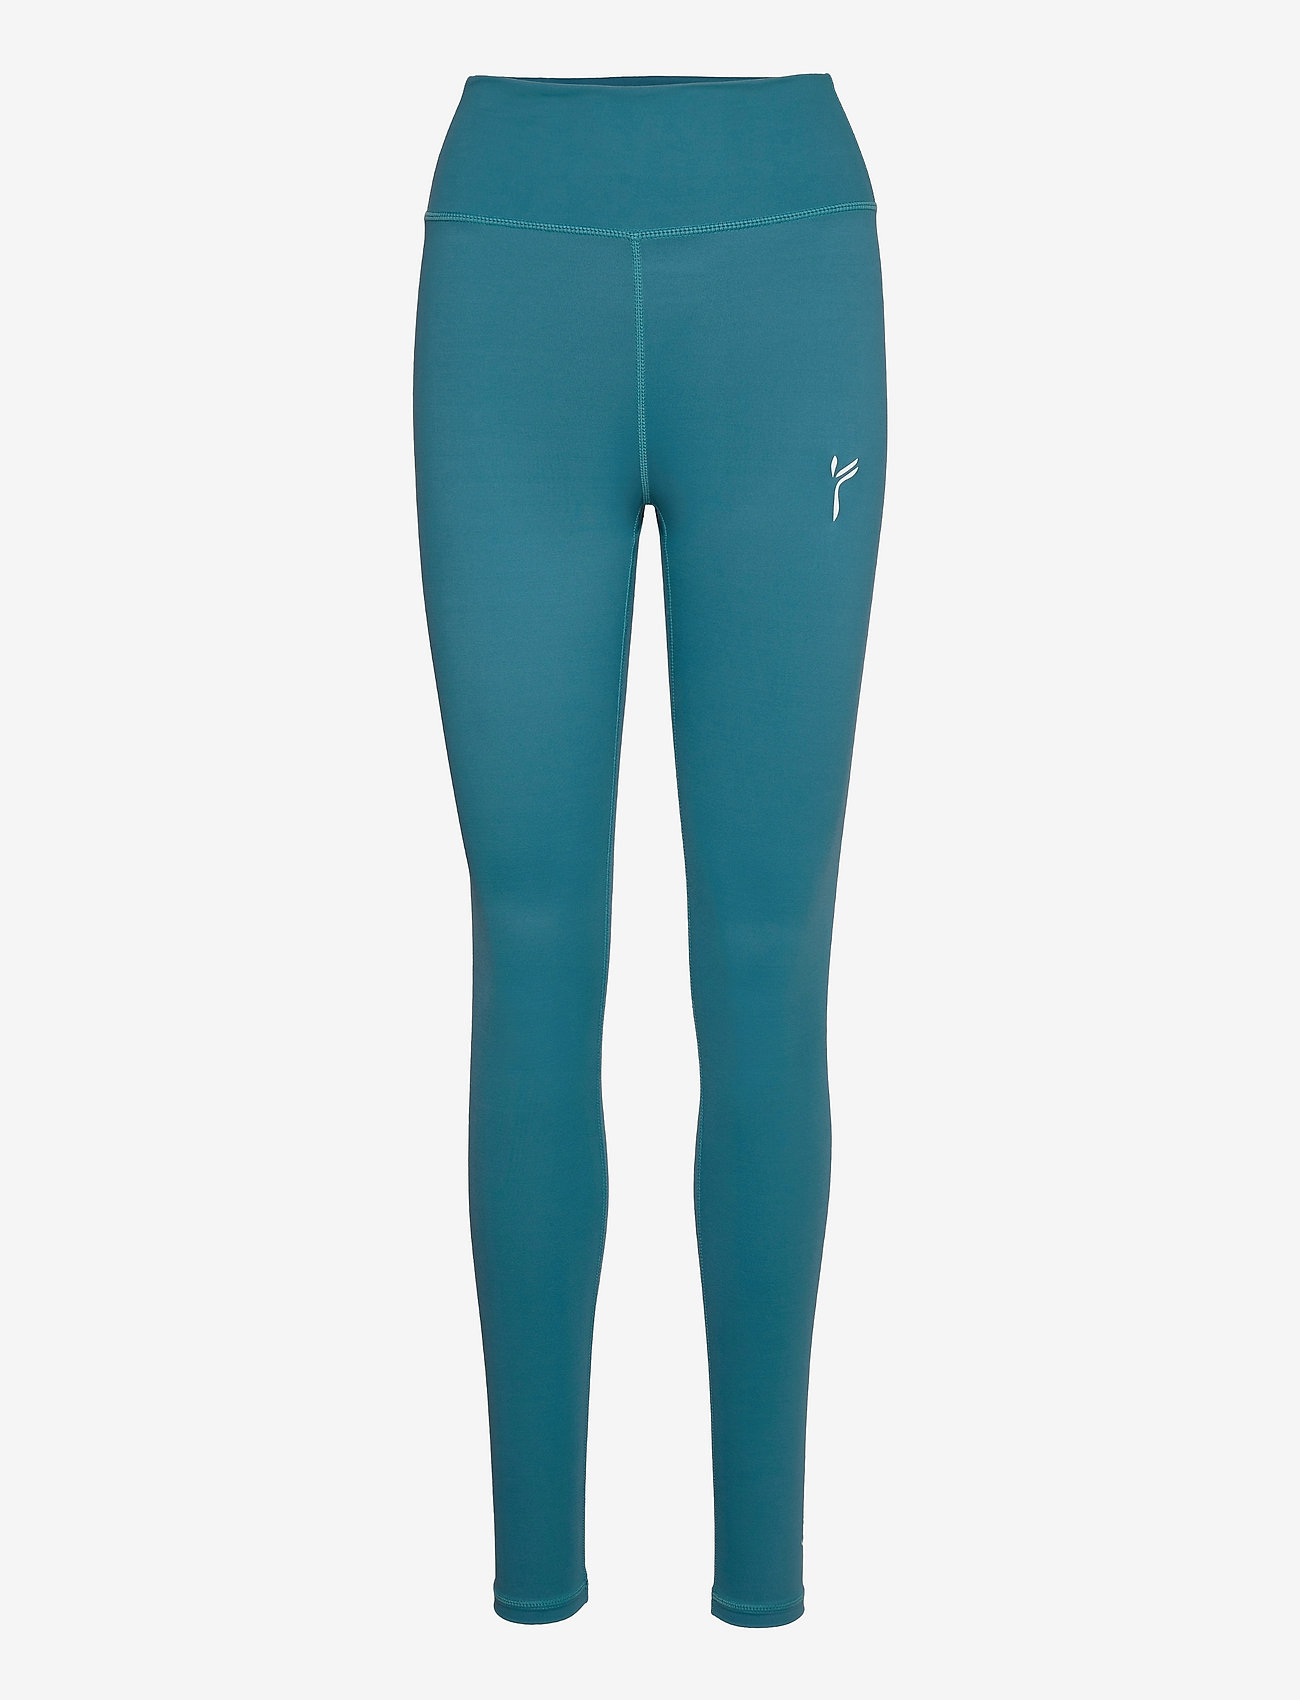 Famme - Essential Tights - lauf-& trainingstights - blue - 0